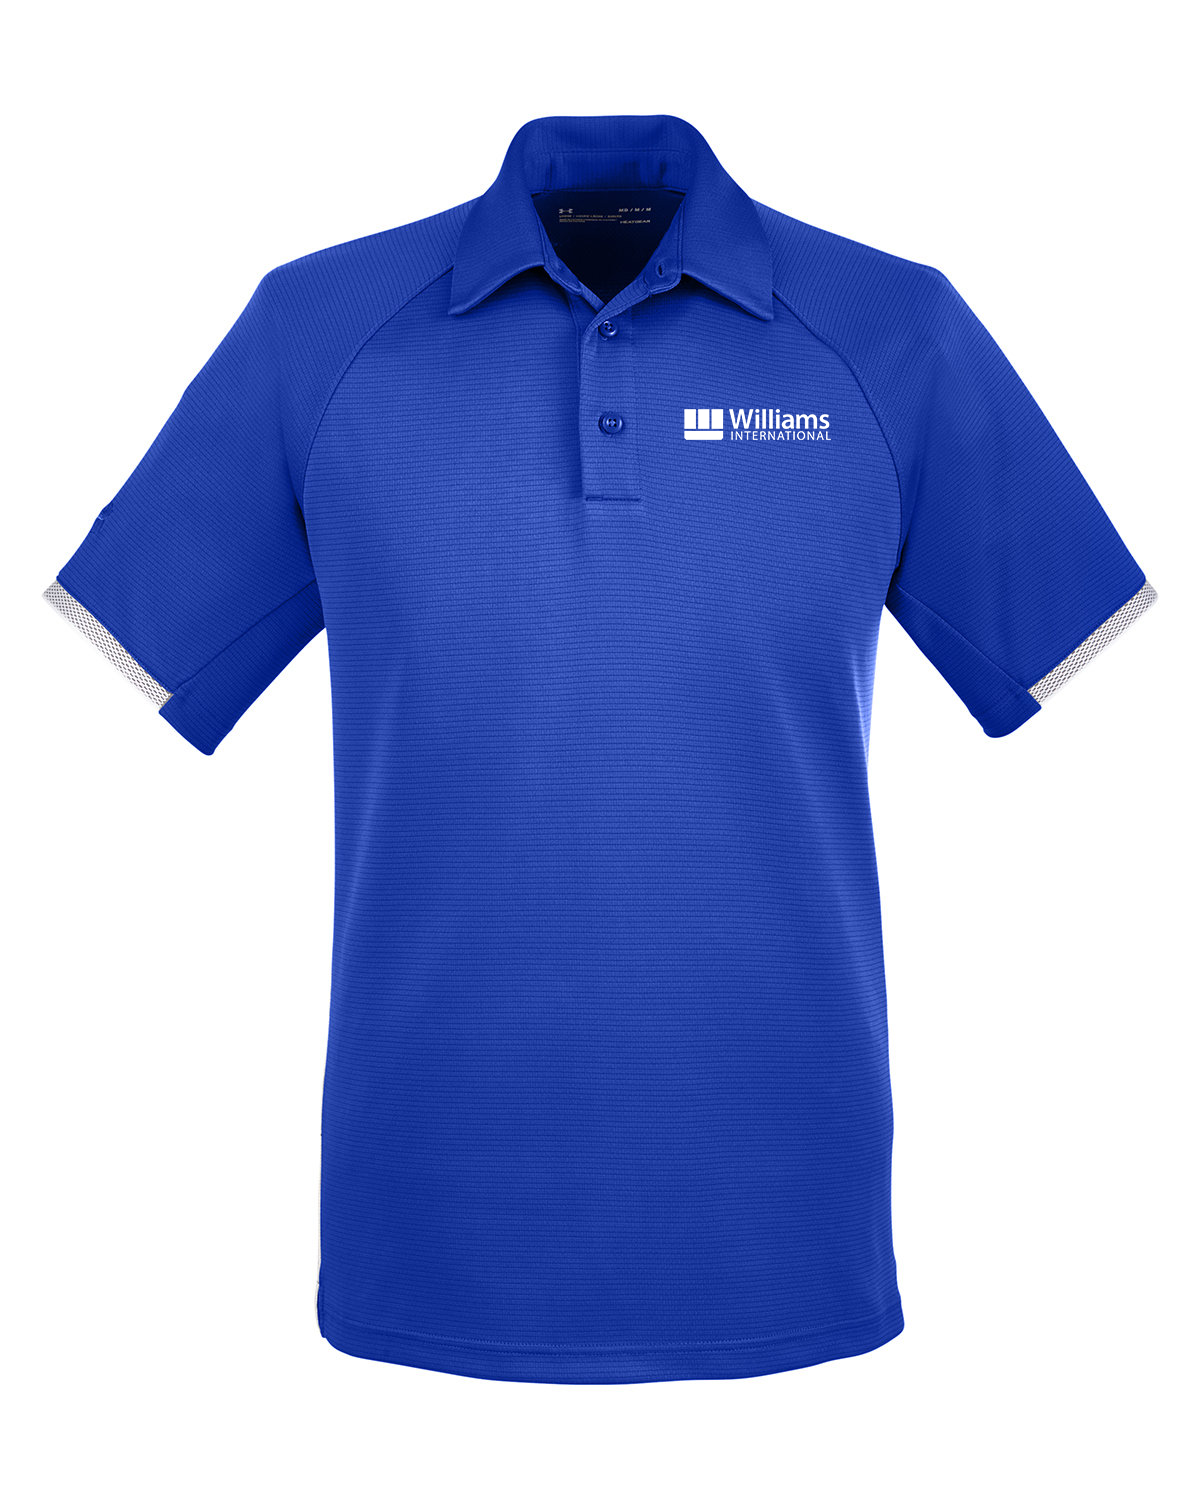 custom design of Under Armour 1343102 - Mens Corporate Rival Polo